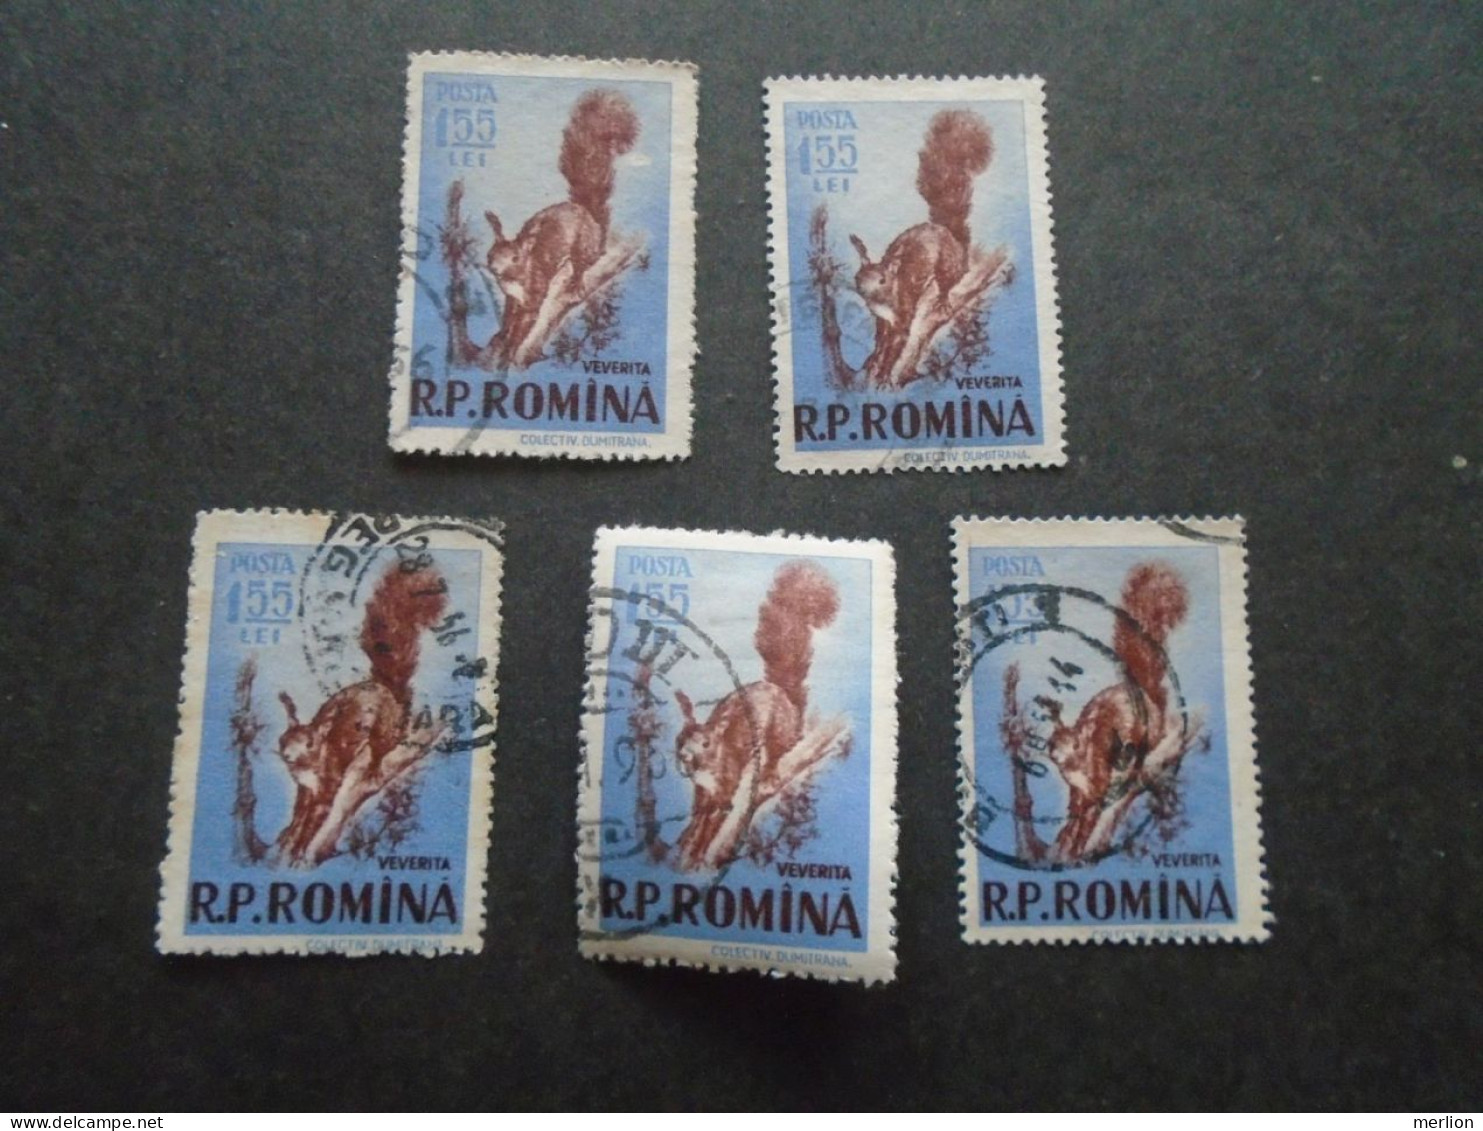 D202279   Romania - 1955  -  Lot Of 5 Used Stamps   Squirrel - Eichhörnchen - Écureuil 1572 - Used Stamps